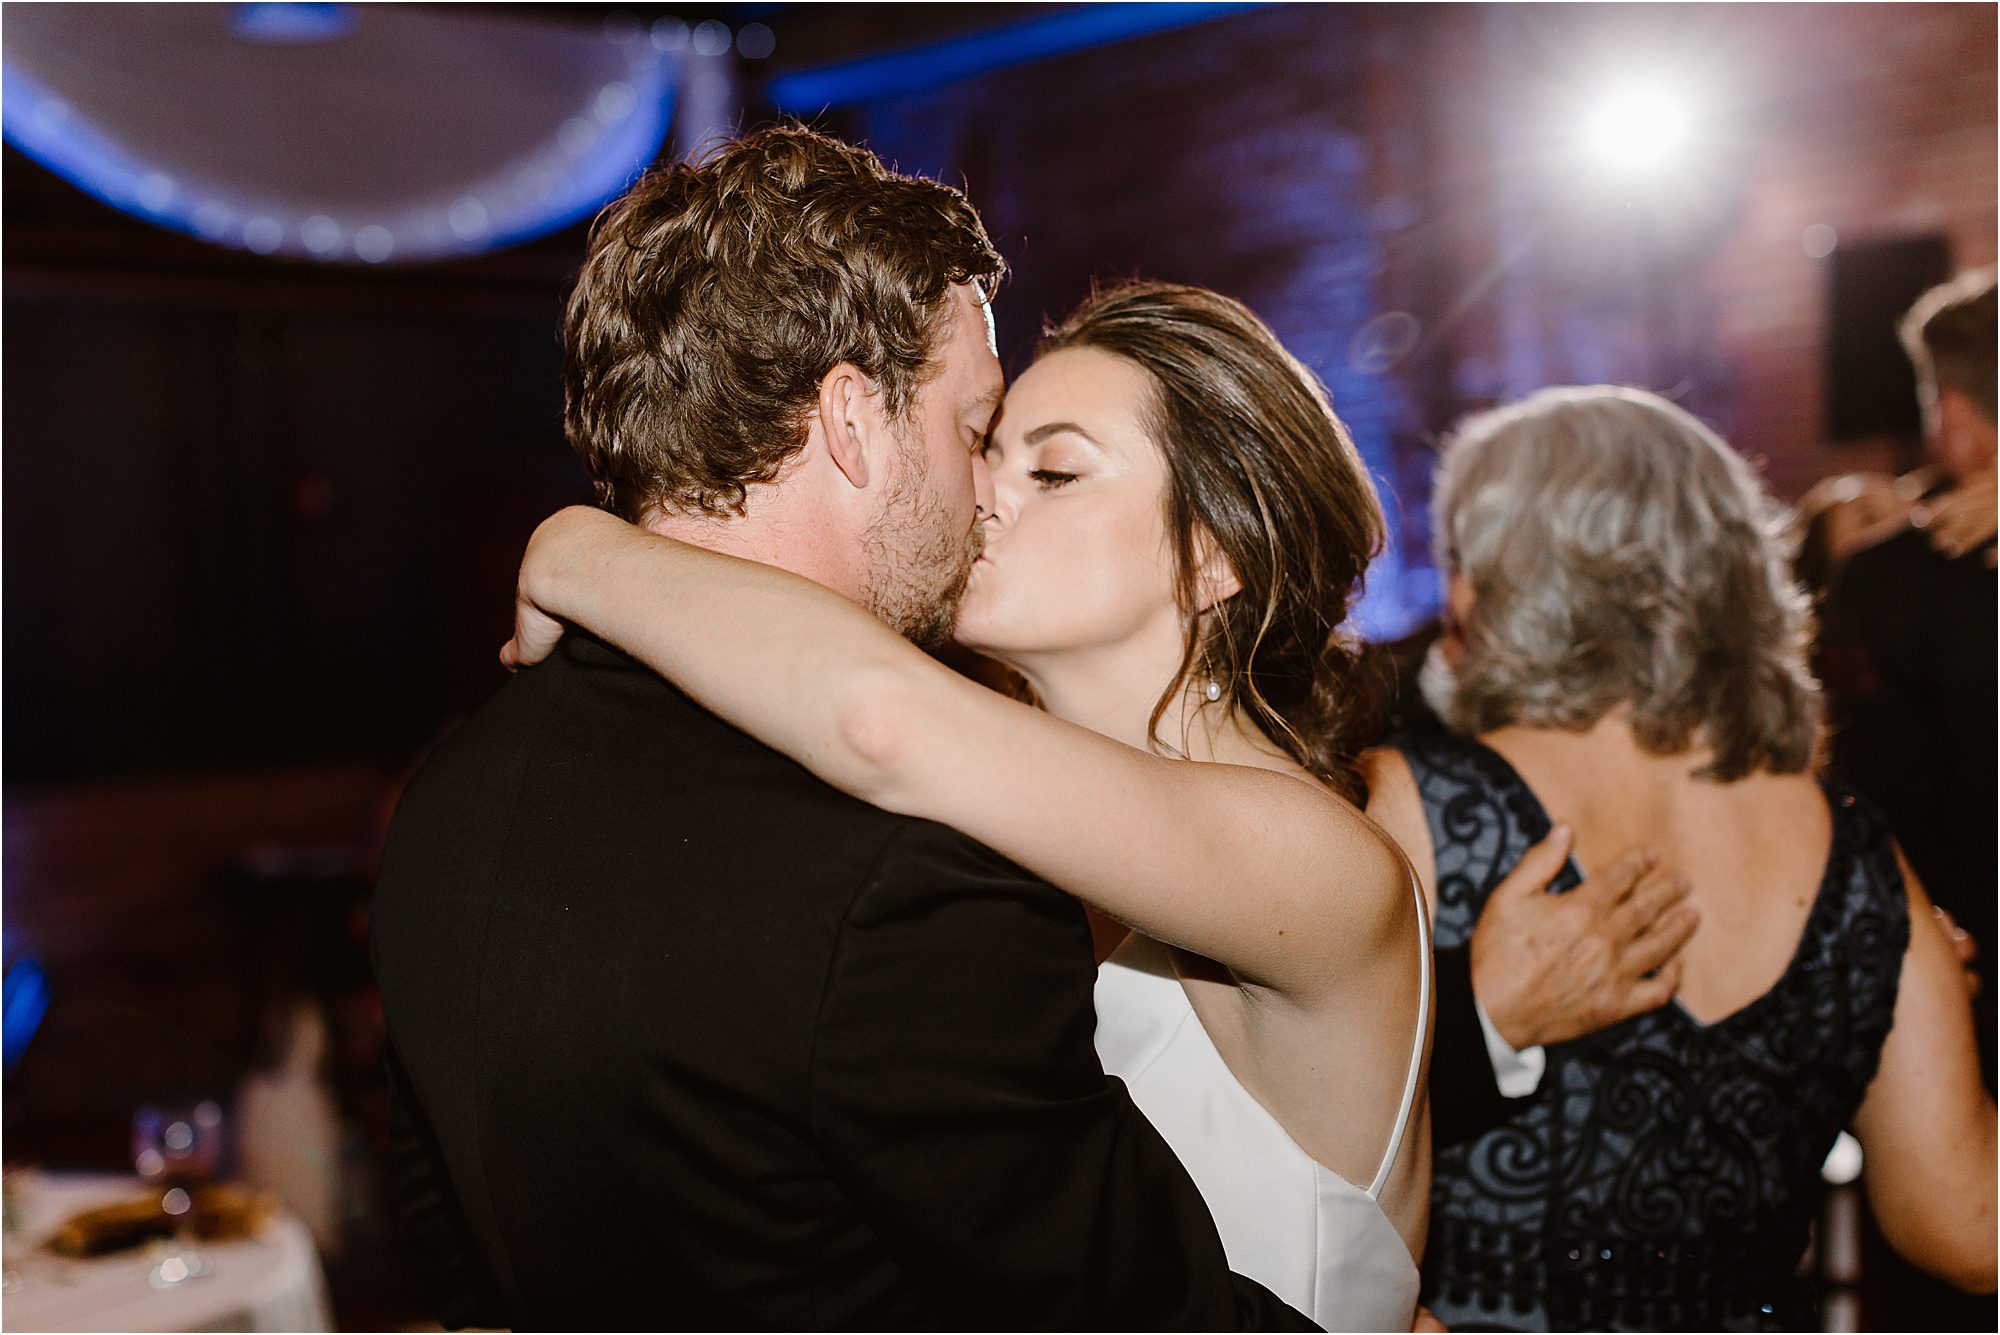 bride and groom kiss during dancing at wedding reception